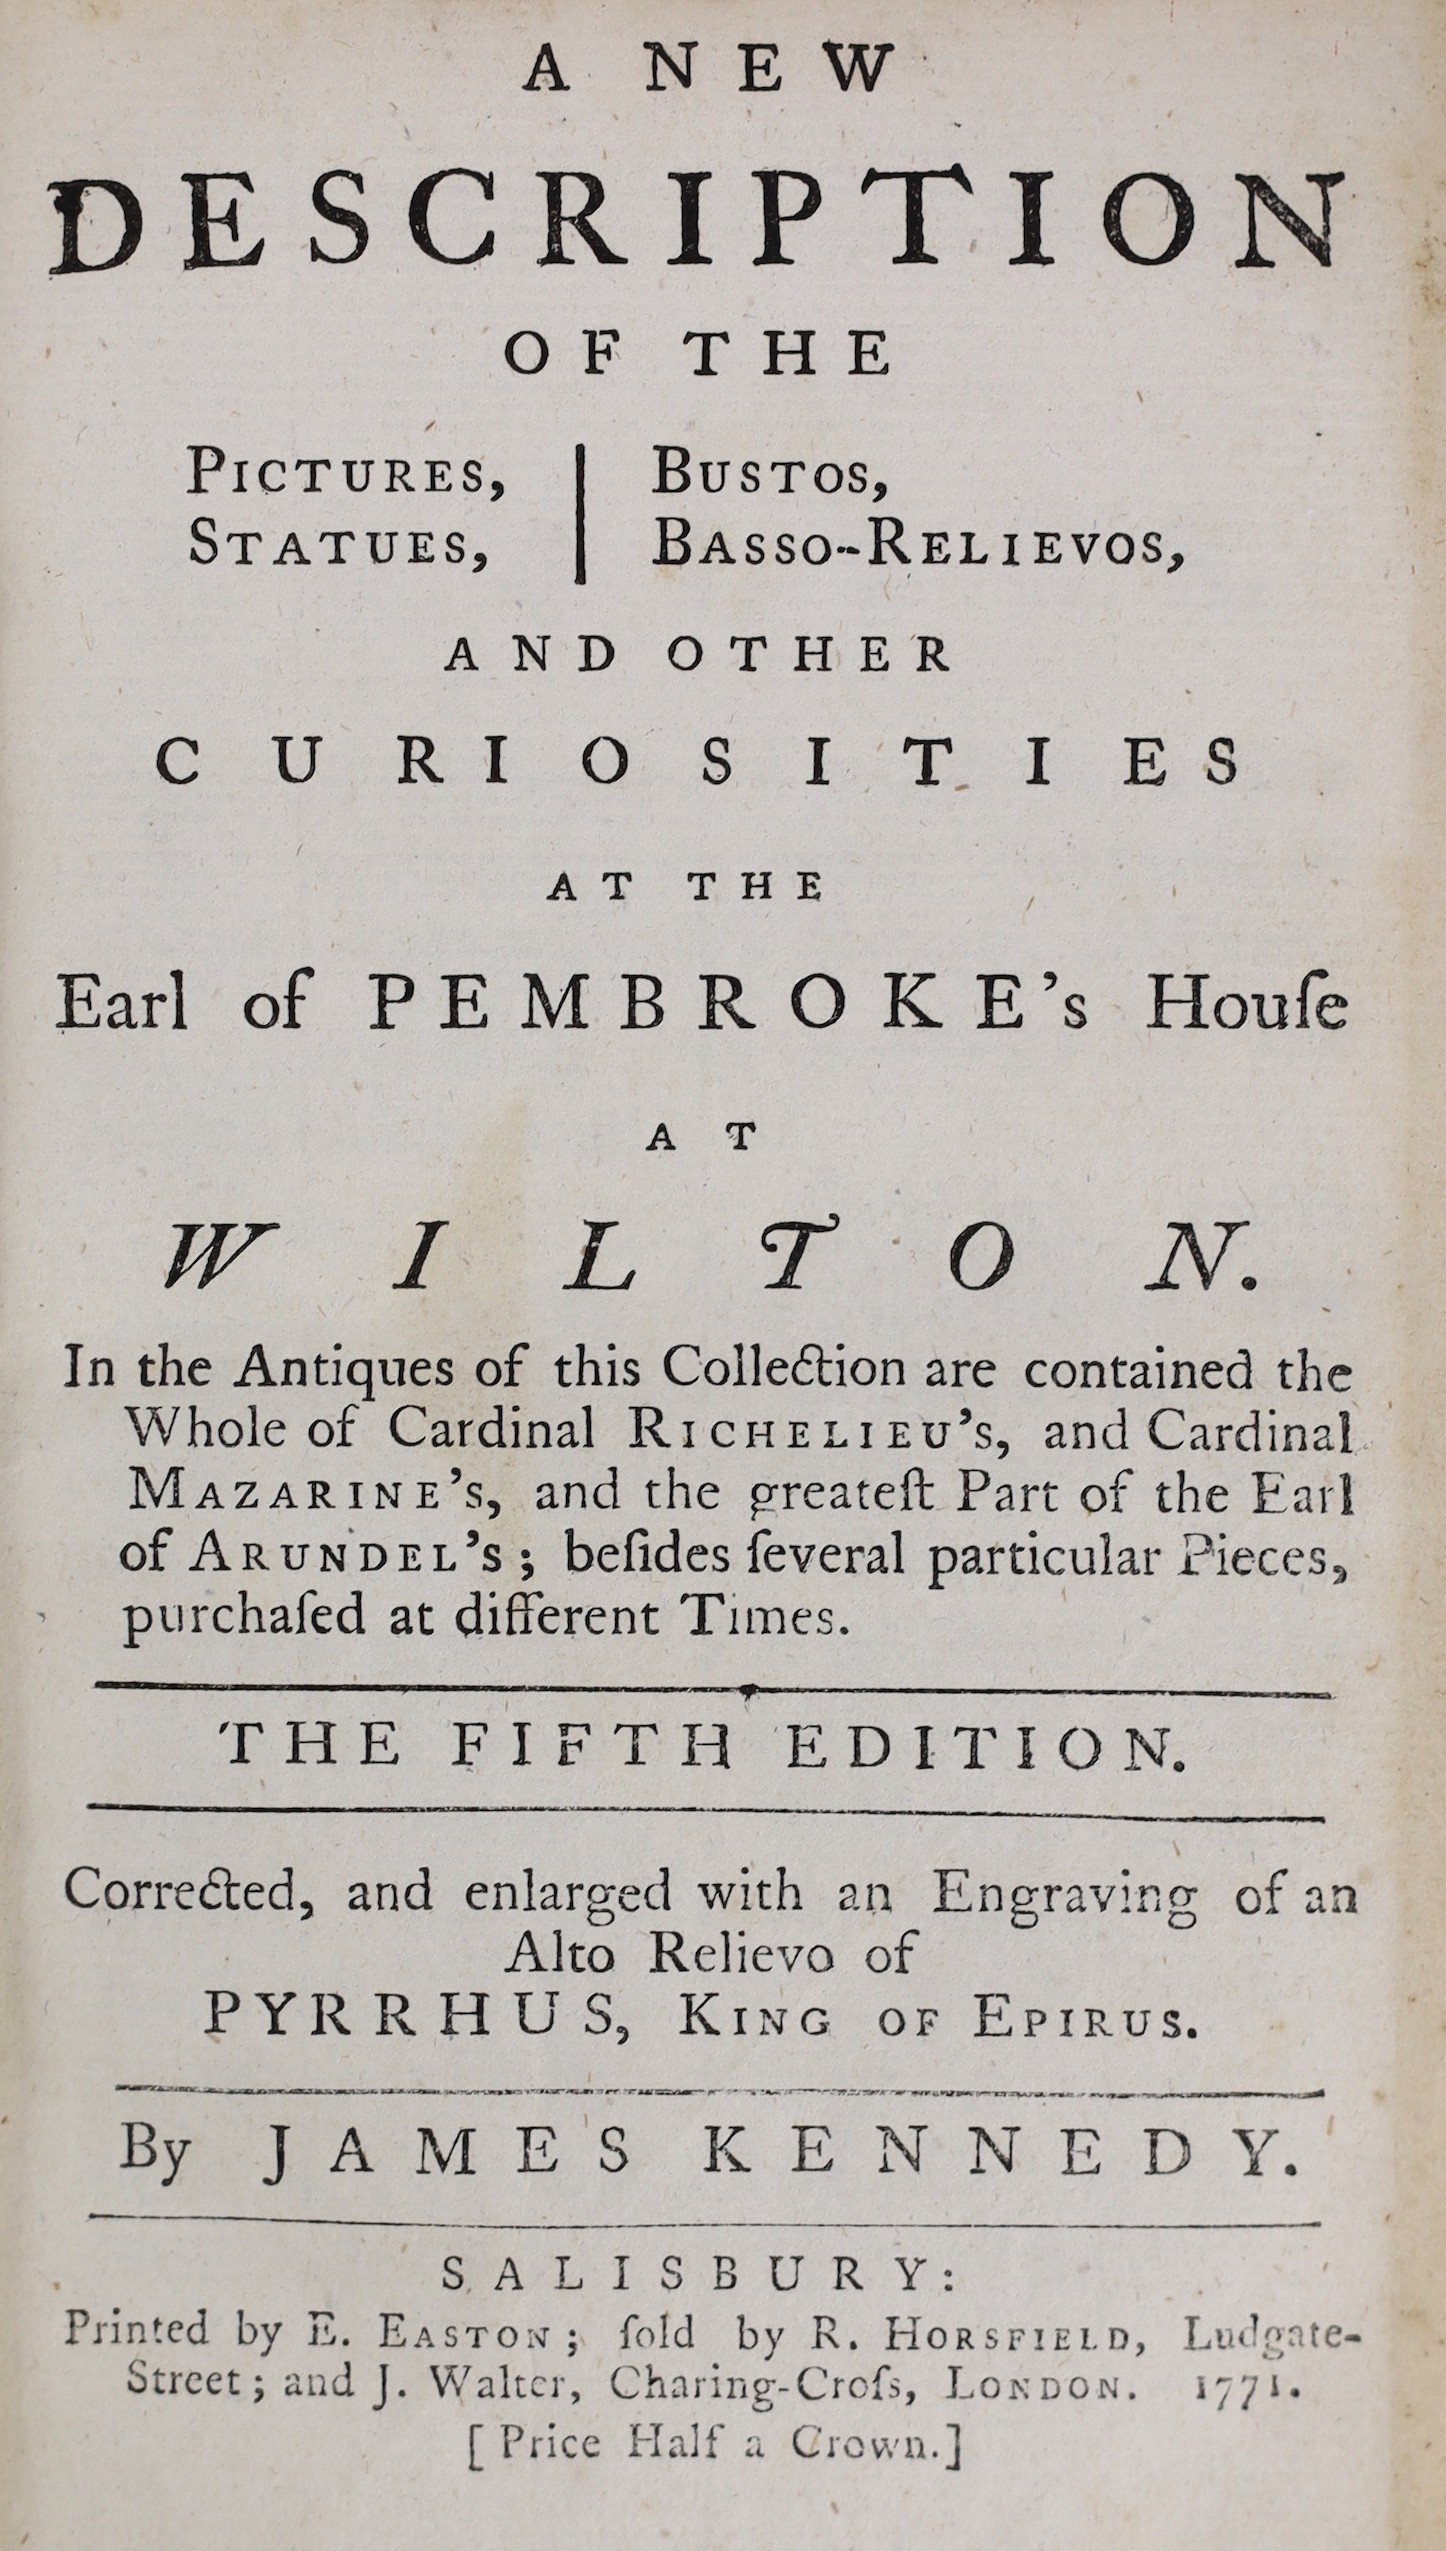 WILTS: Britton, John - An Historical Account of Corsham House, in Wiltshire; the Seat of Paul Cobb Methuen Esq. With a catalogue of his celebrated collection of pictures ... frontis. rebound cloth with printed label. 180